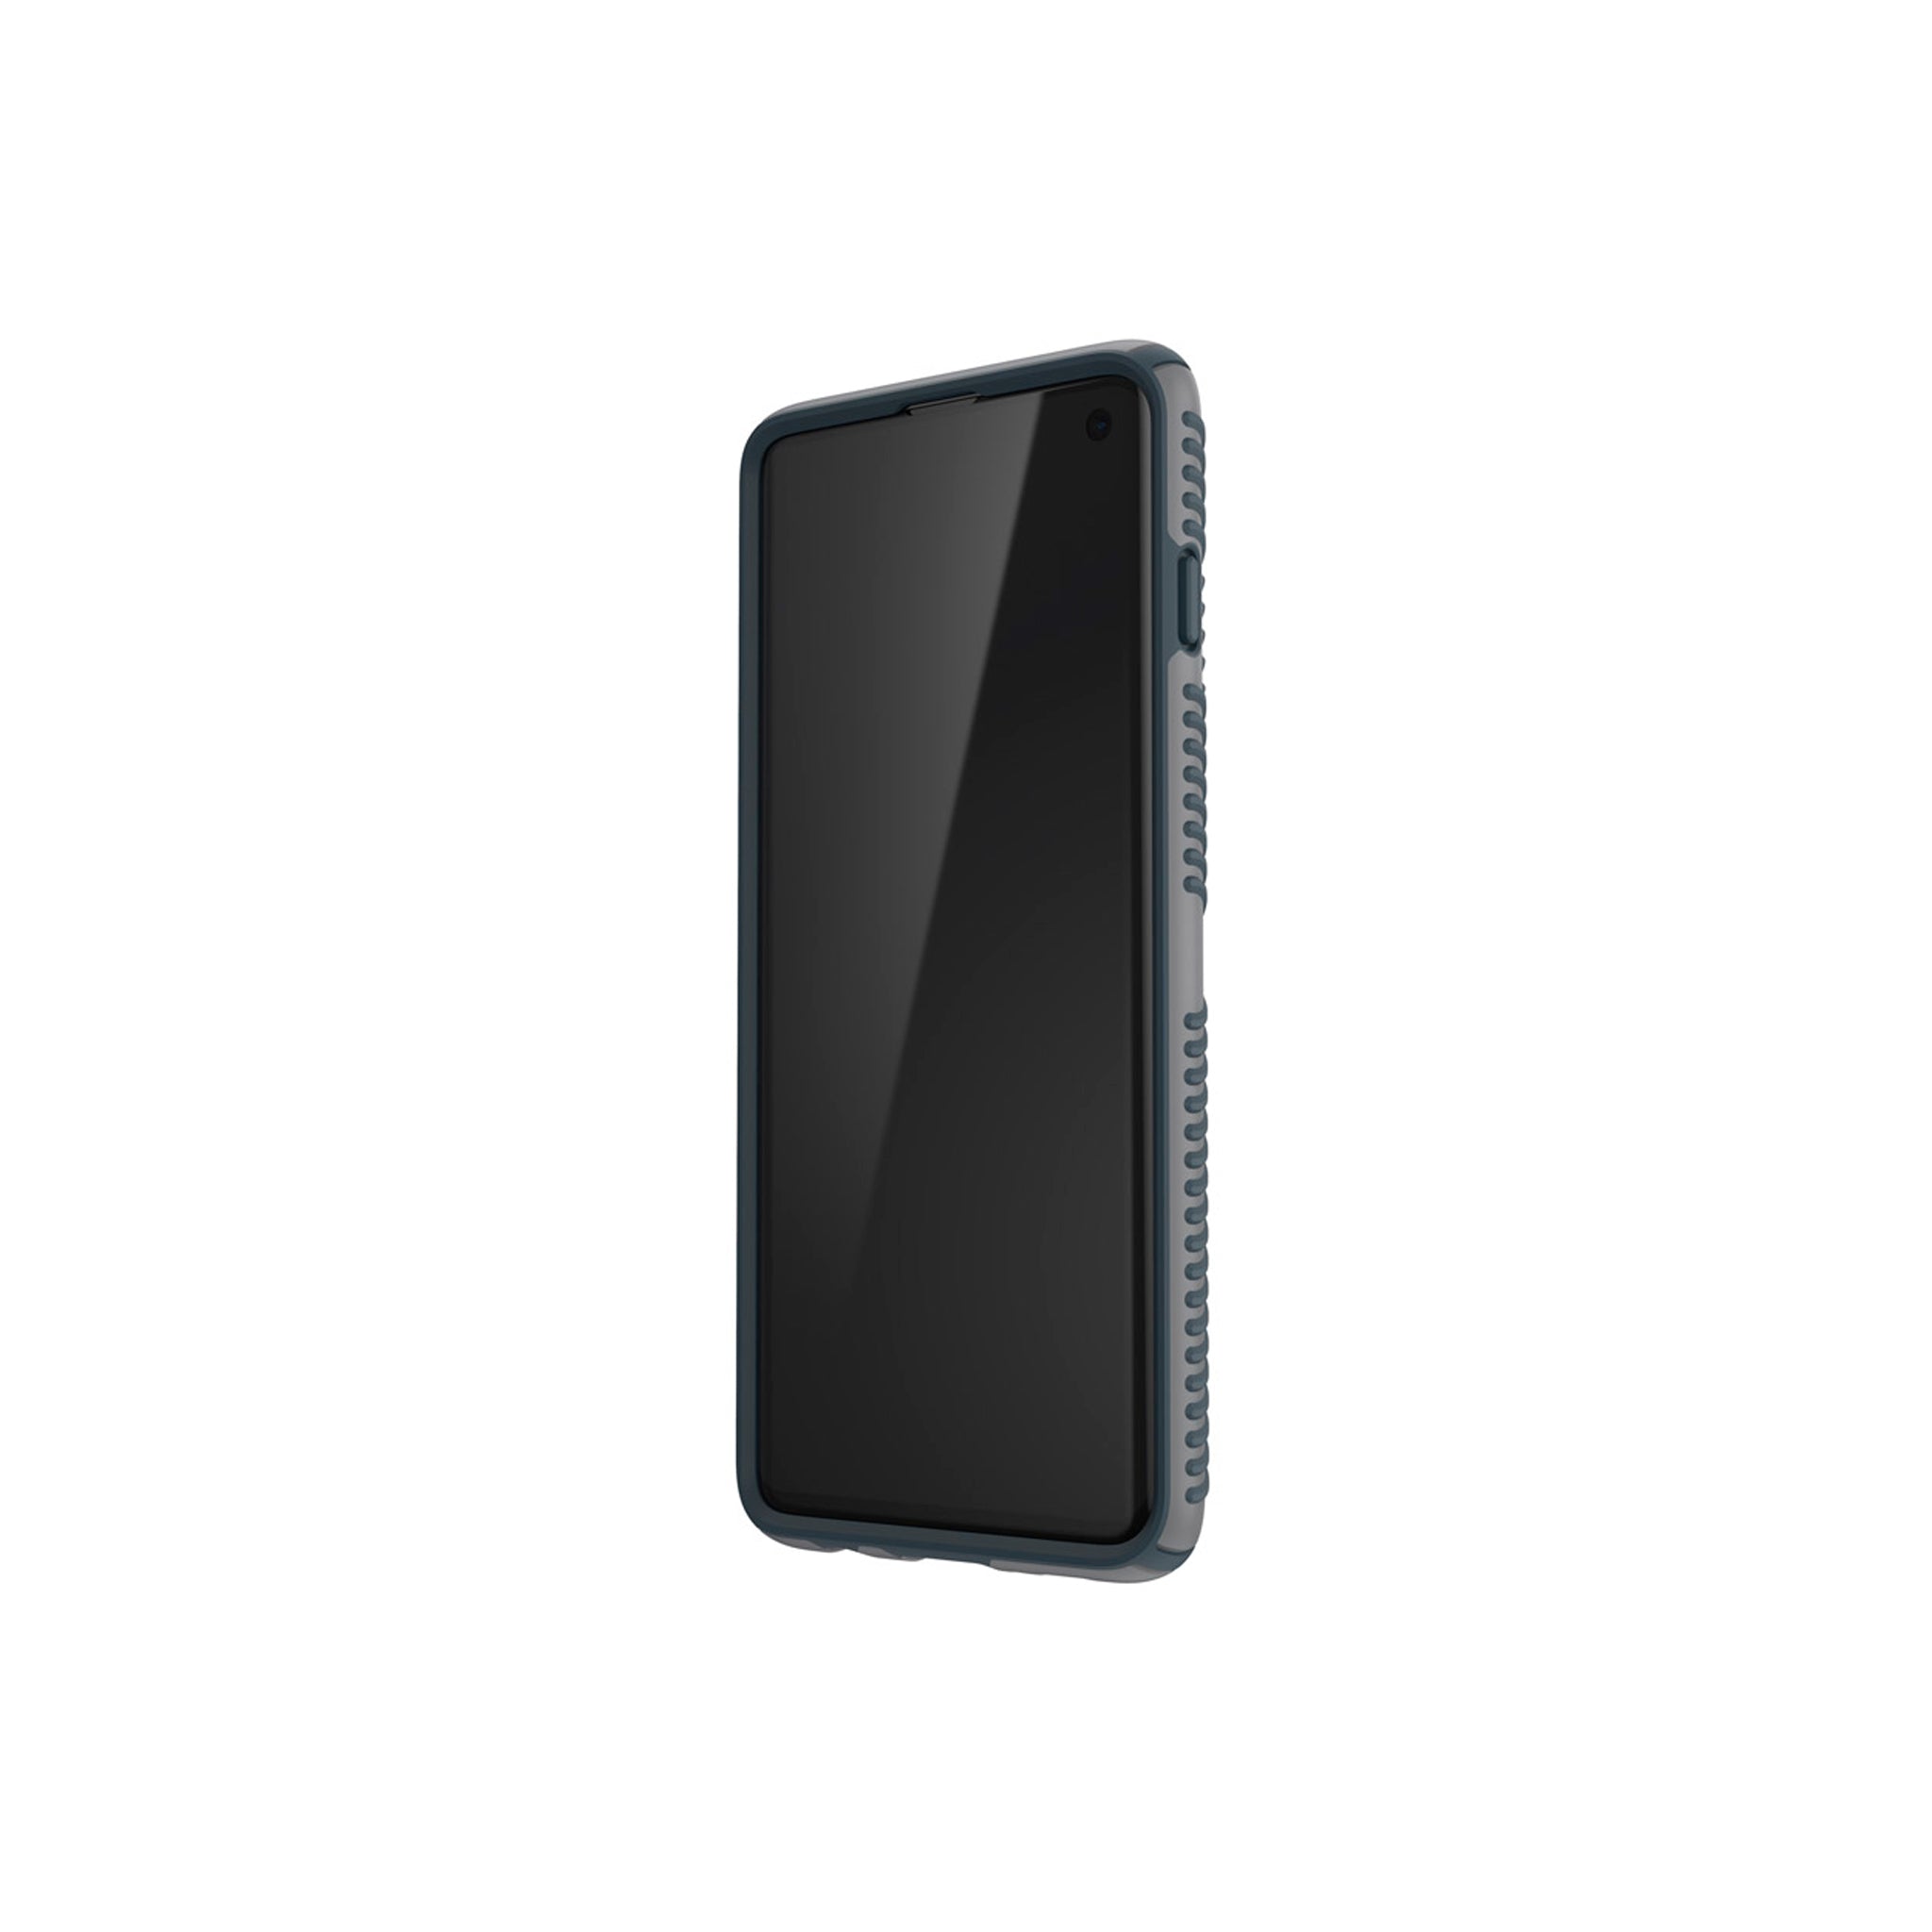 Speck - Presidio Grip Case For Samsung Galaxy S10 - Graphite Gray And Charcoal Gray